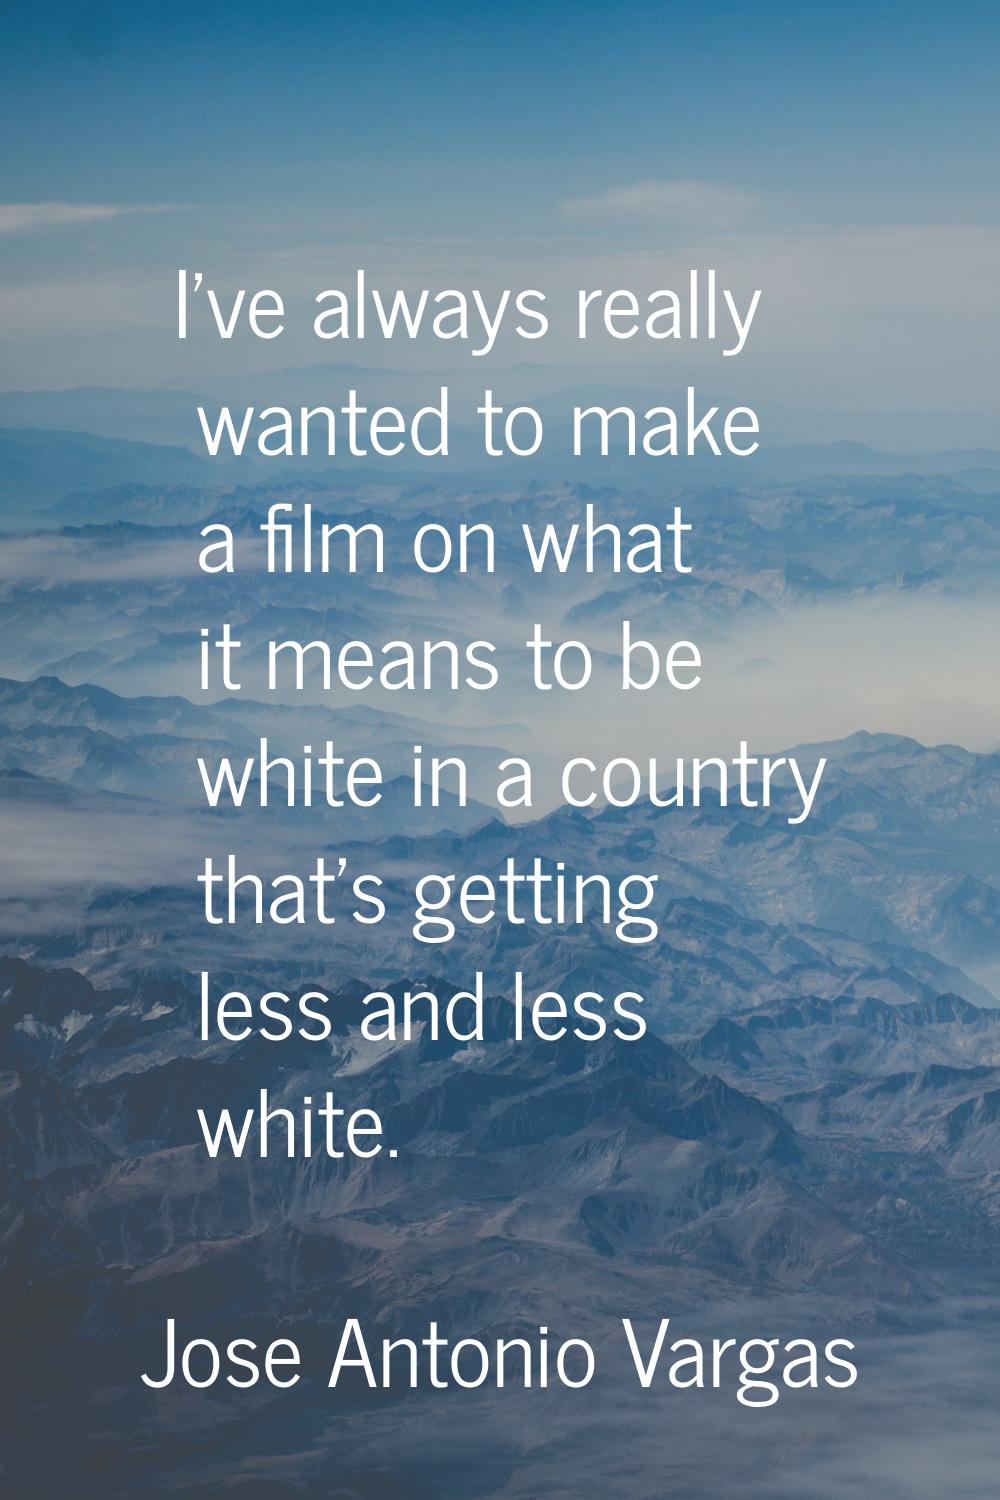 I've always really wanted to make a film on what it means to be white in a country that's getting l